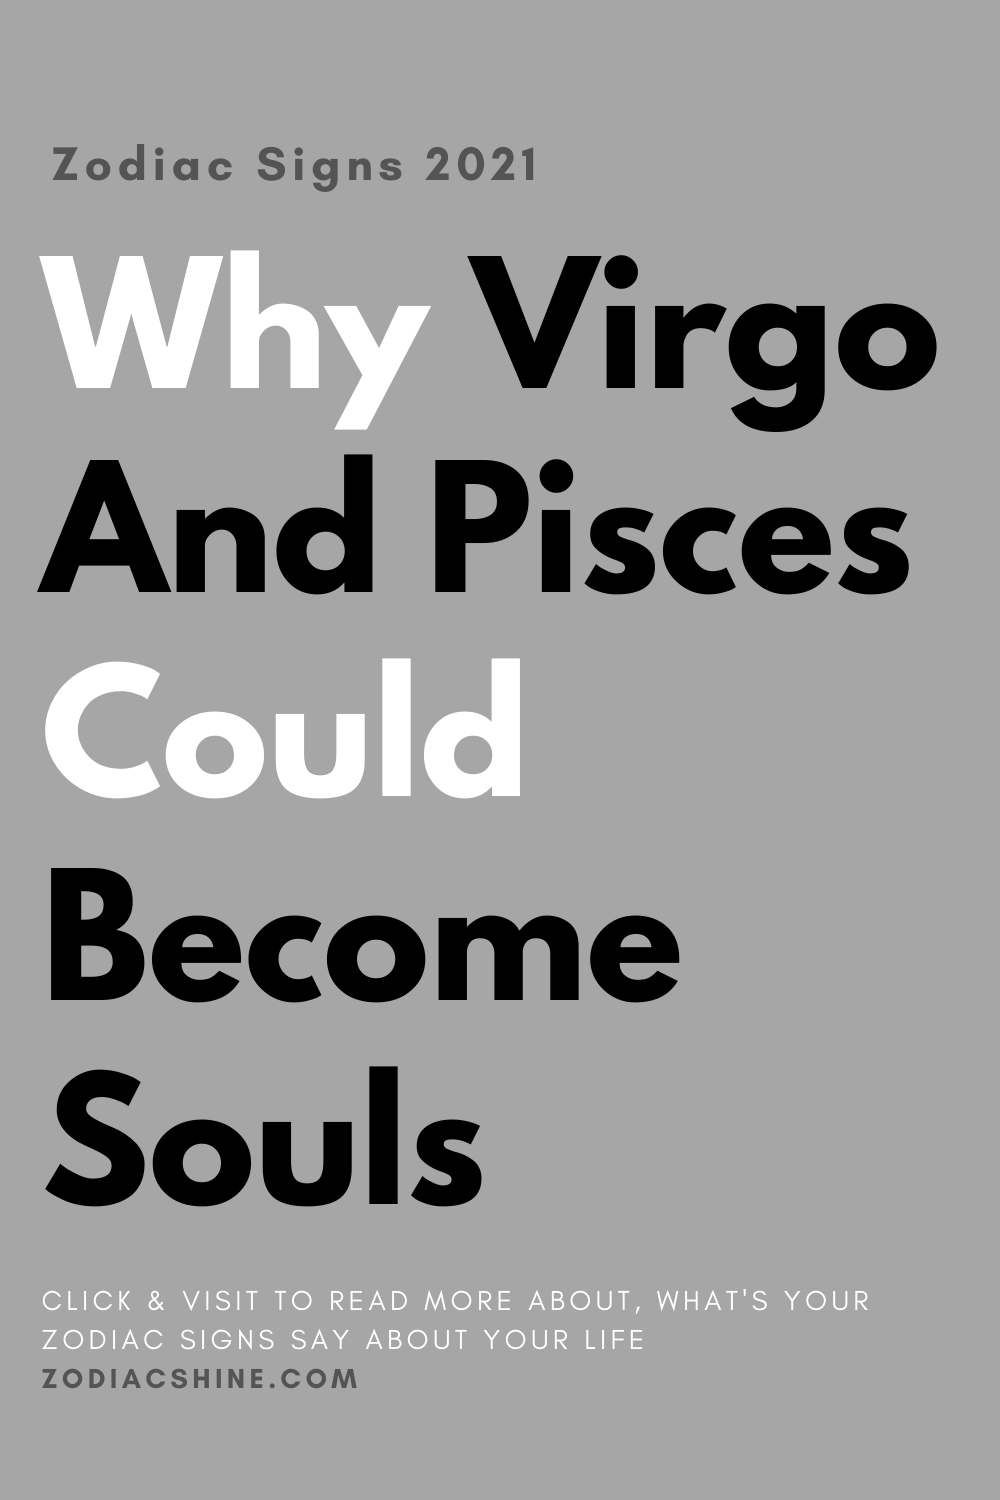 Why Virgo And Pisces Could Become Souls